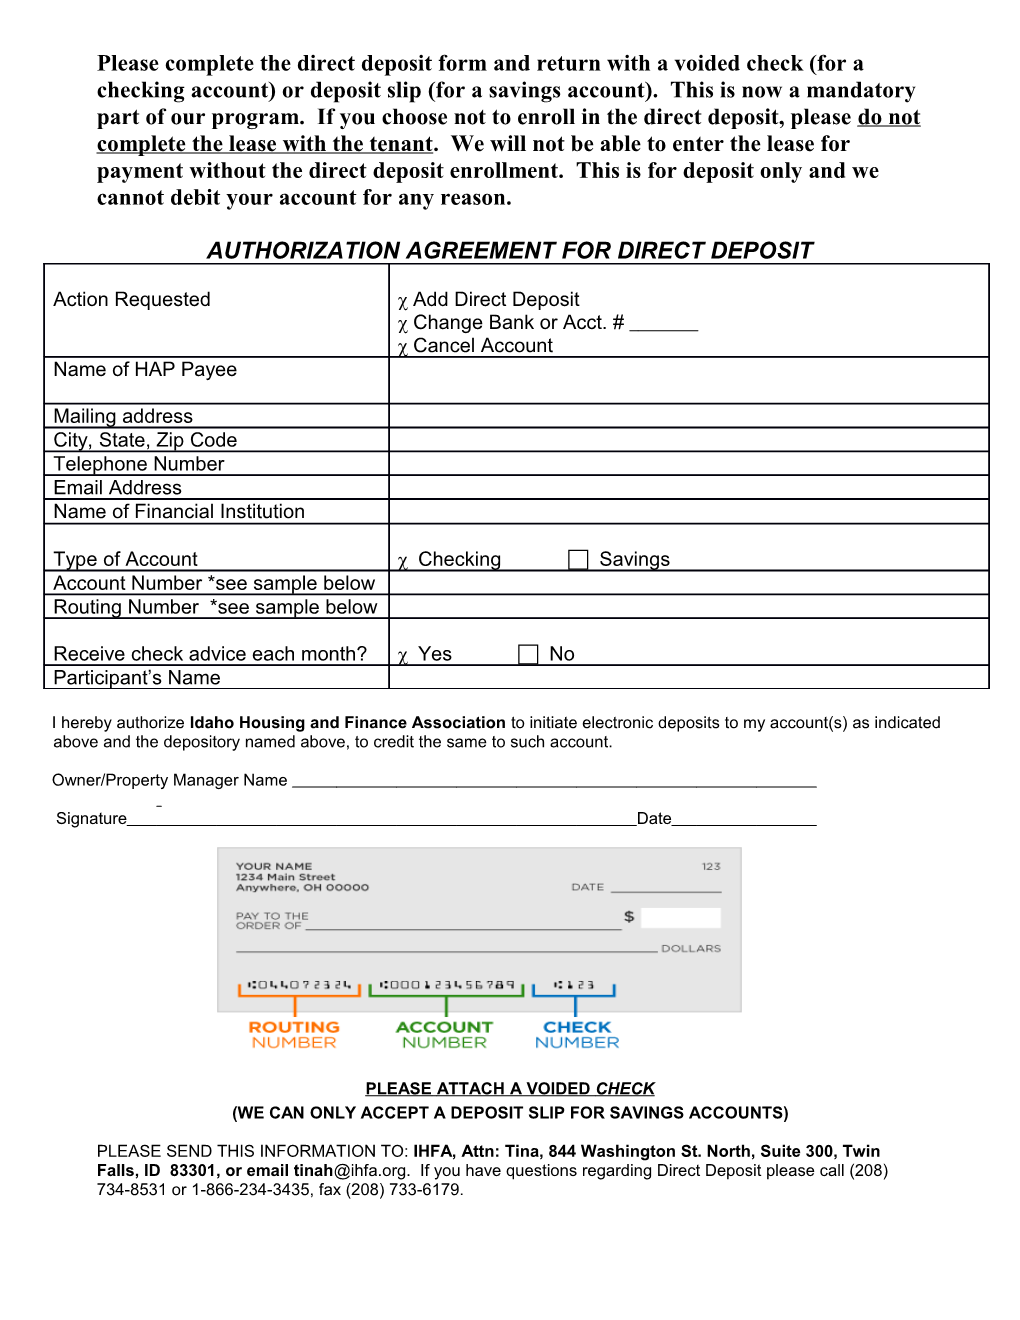 Authorization Agreement for Direct Deposit s1